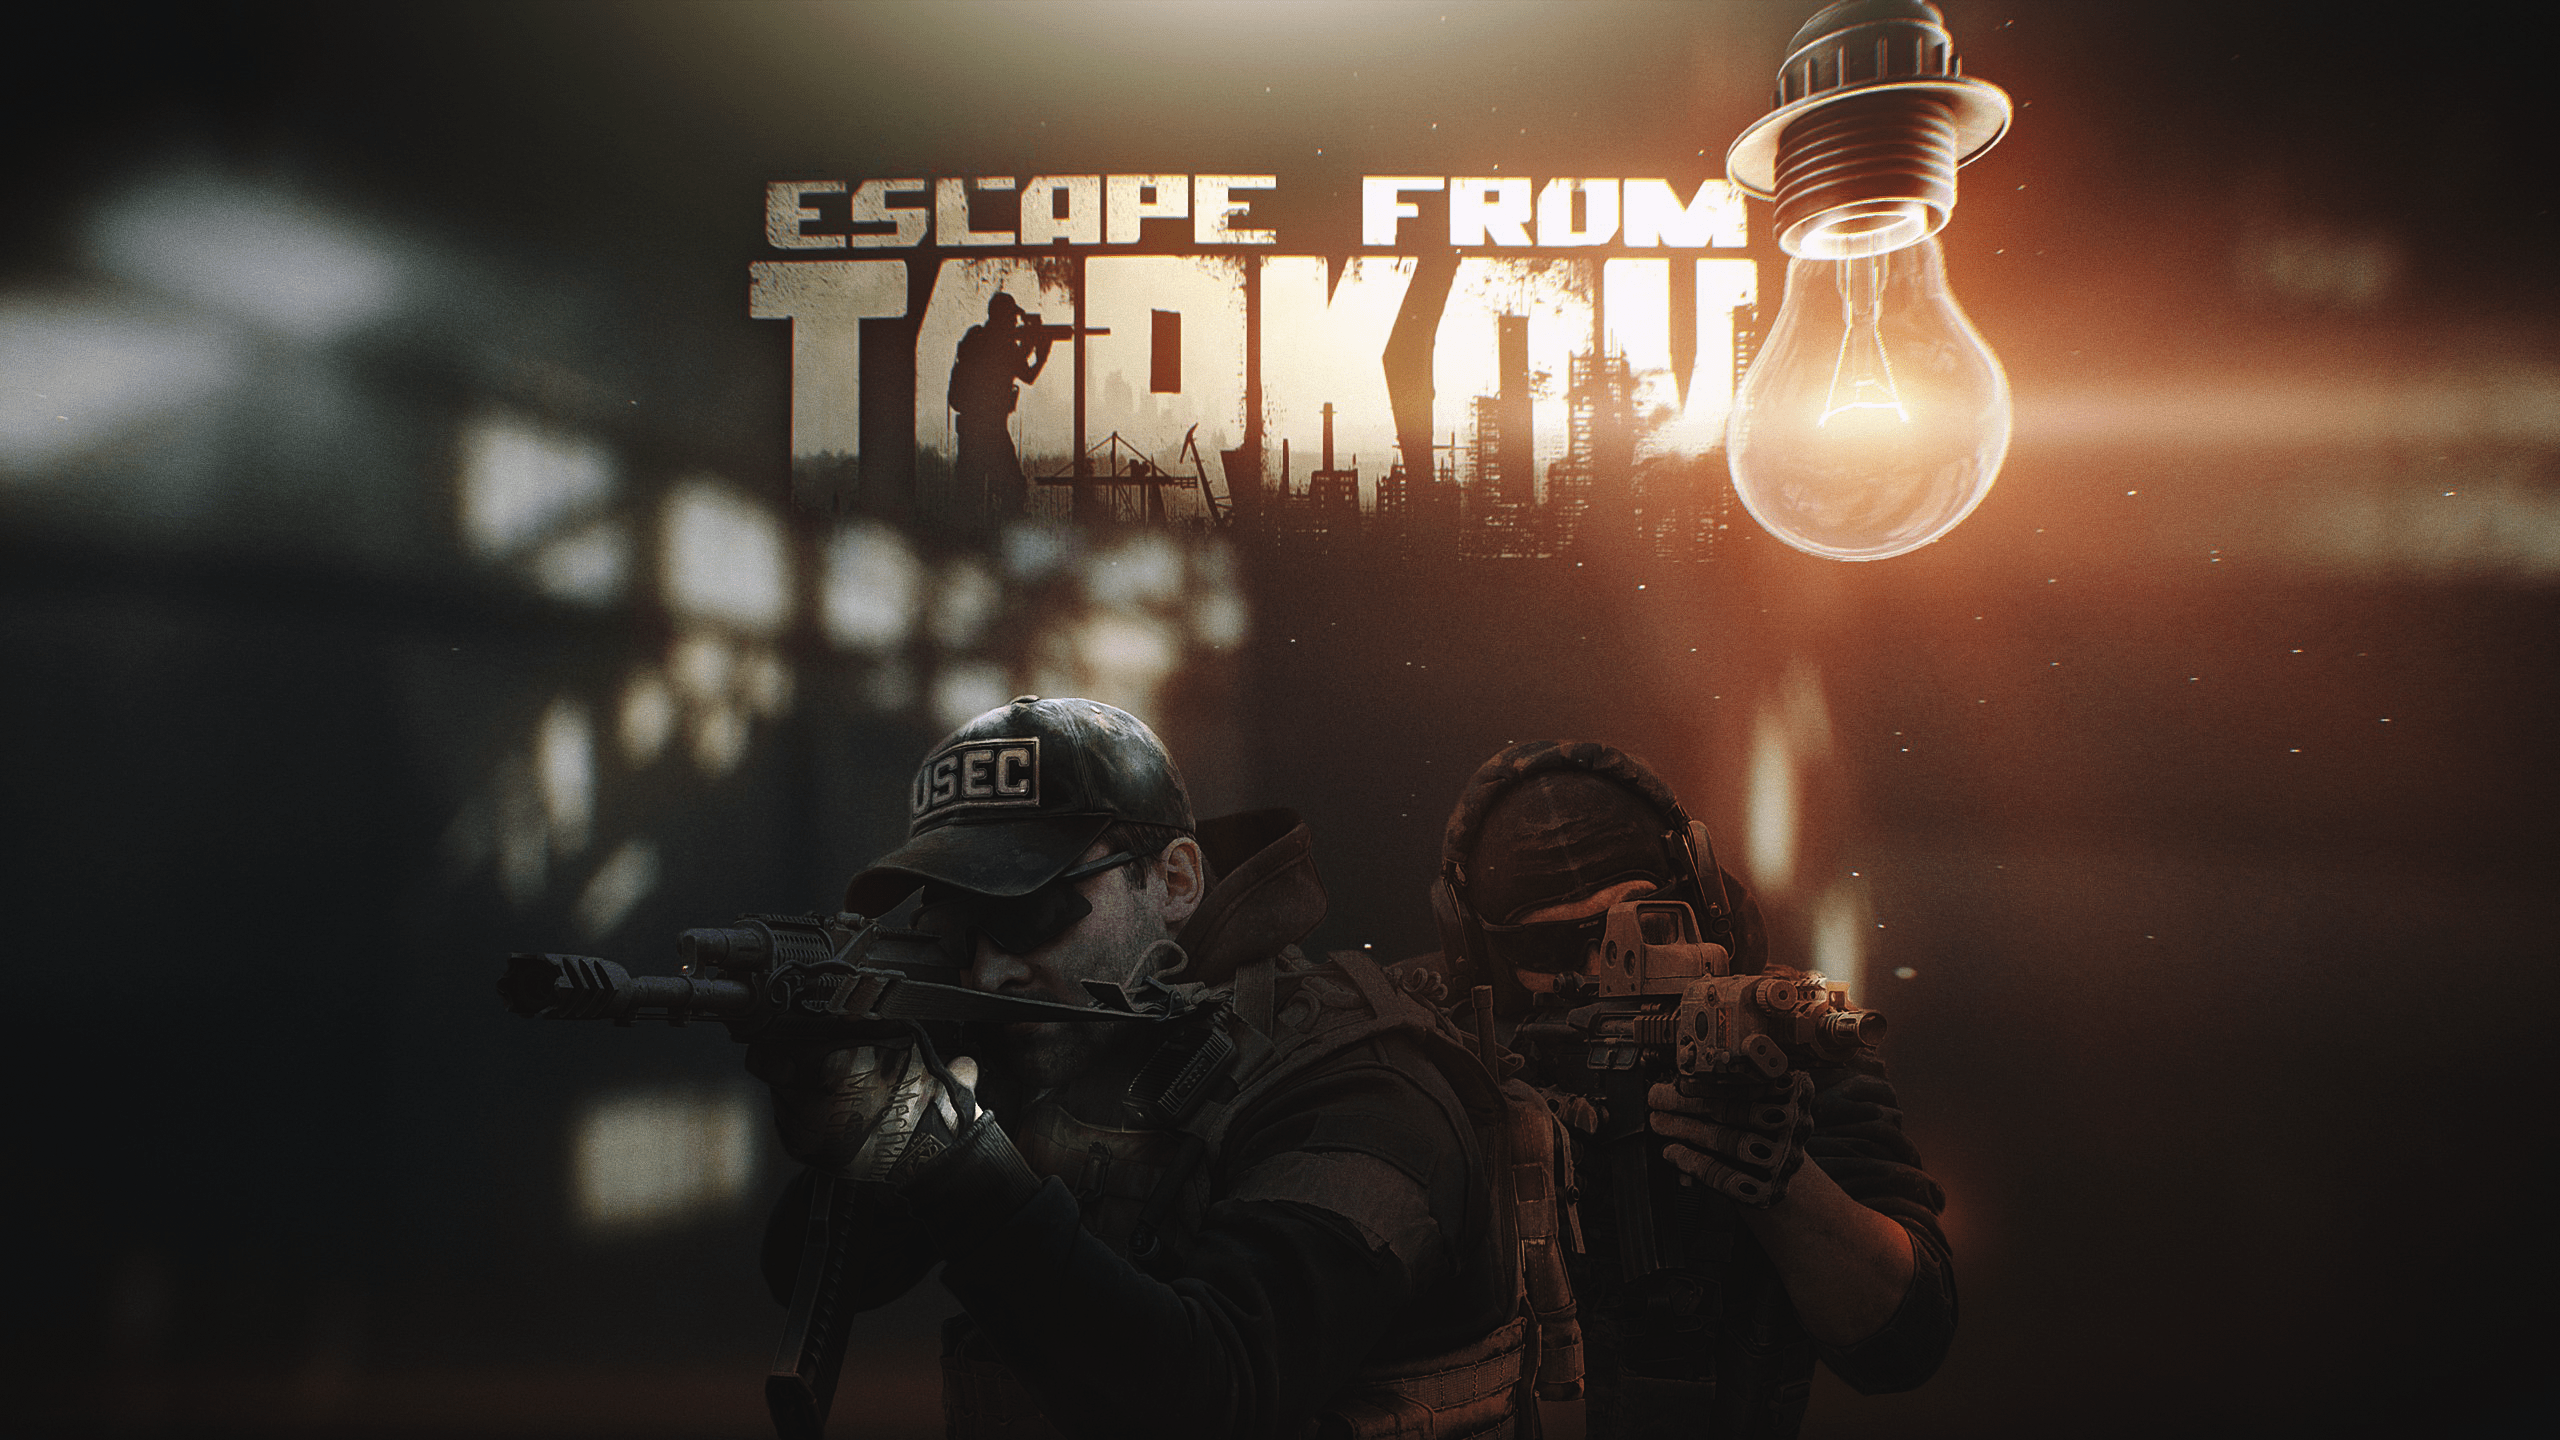 Download wallpaper Game, Avatar, Avatar, Cosplay, Play, Contract Wars, CW,  Escape from Tarkov, Personal avatar, EFT, HOPS, Hired Ops, R.2028, Author:  Bars10, section games in resolution 960x854